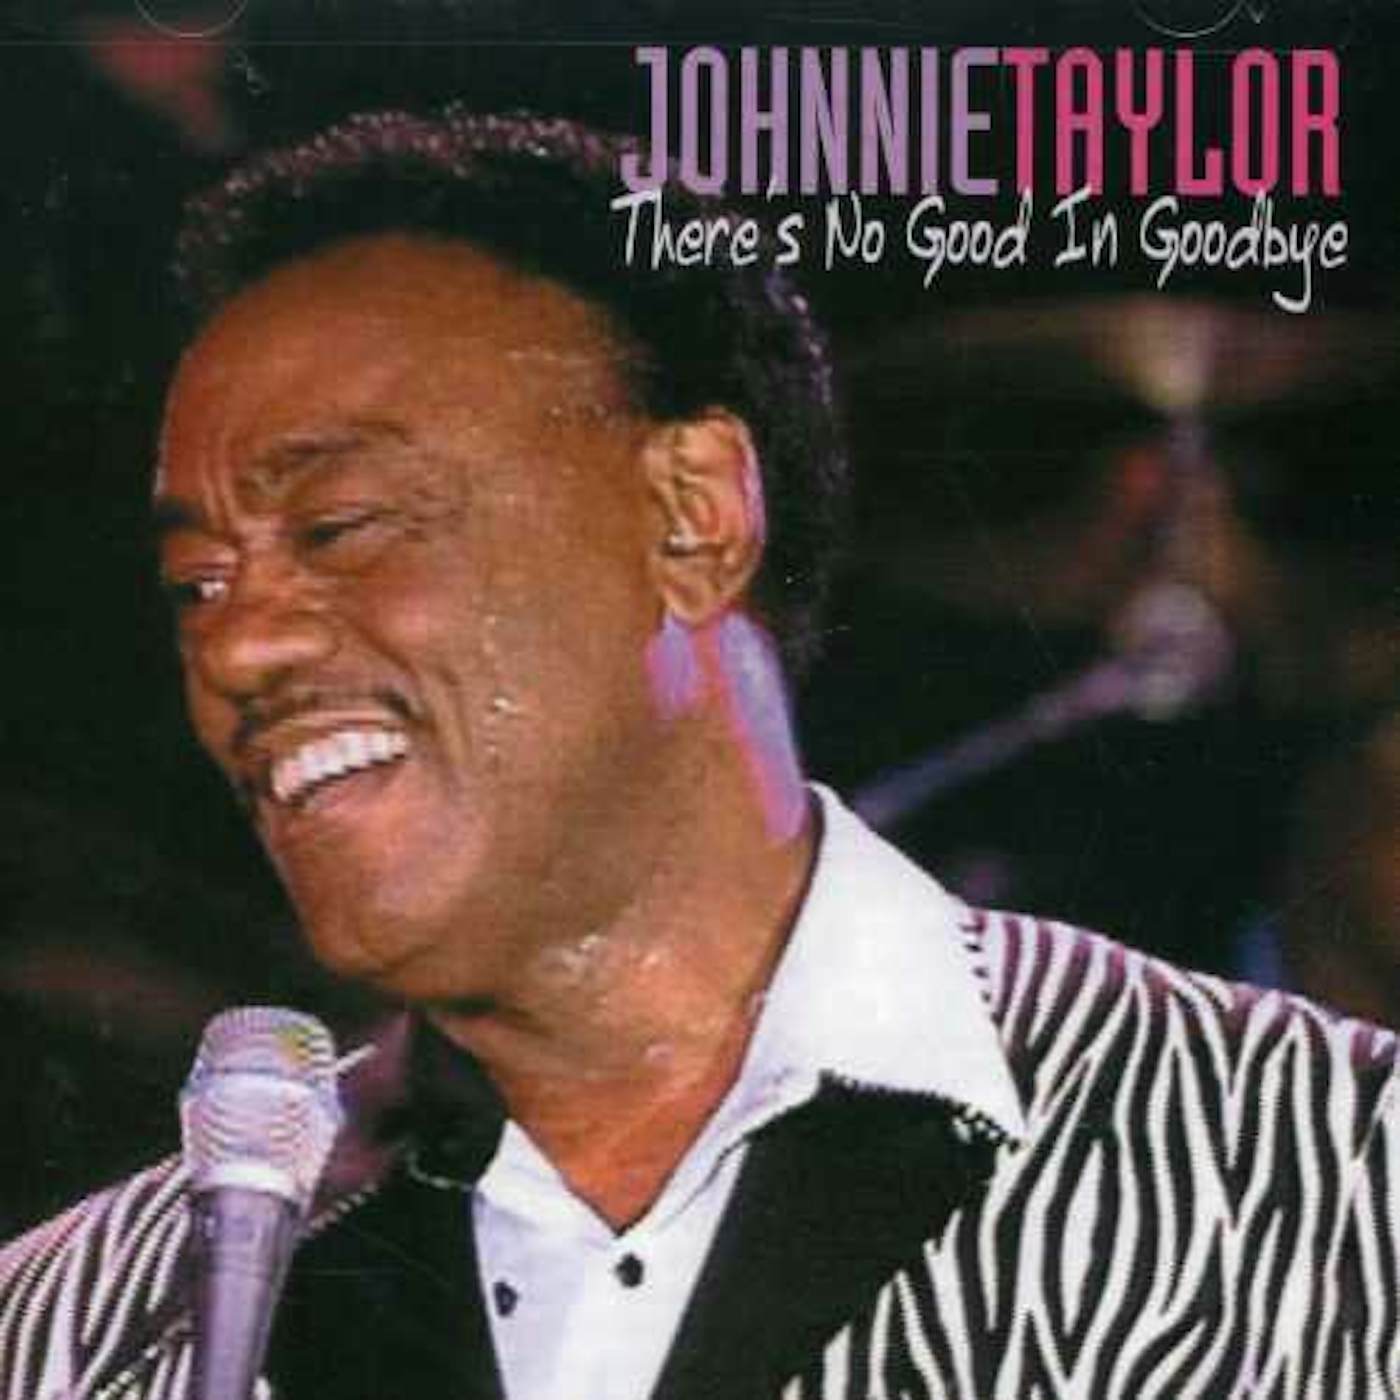 Johnnie Taylor THERE'S NO GOOD IN GOODBYE CD